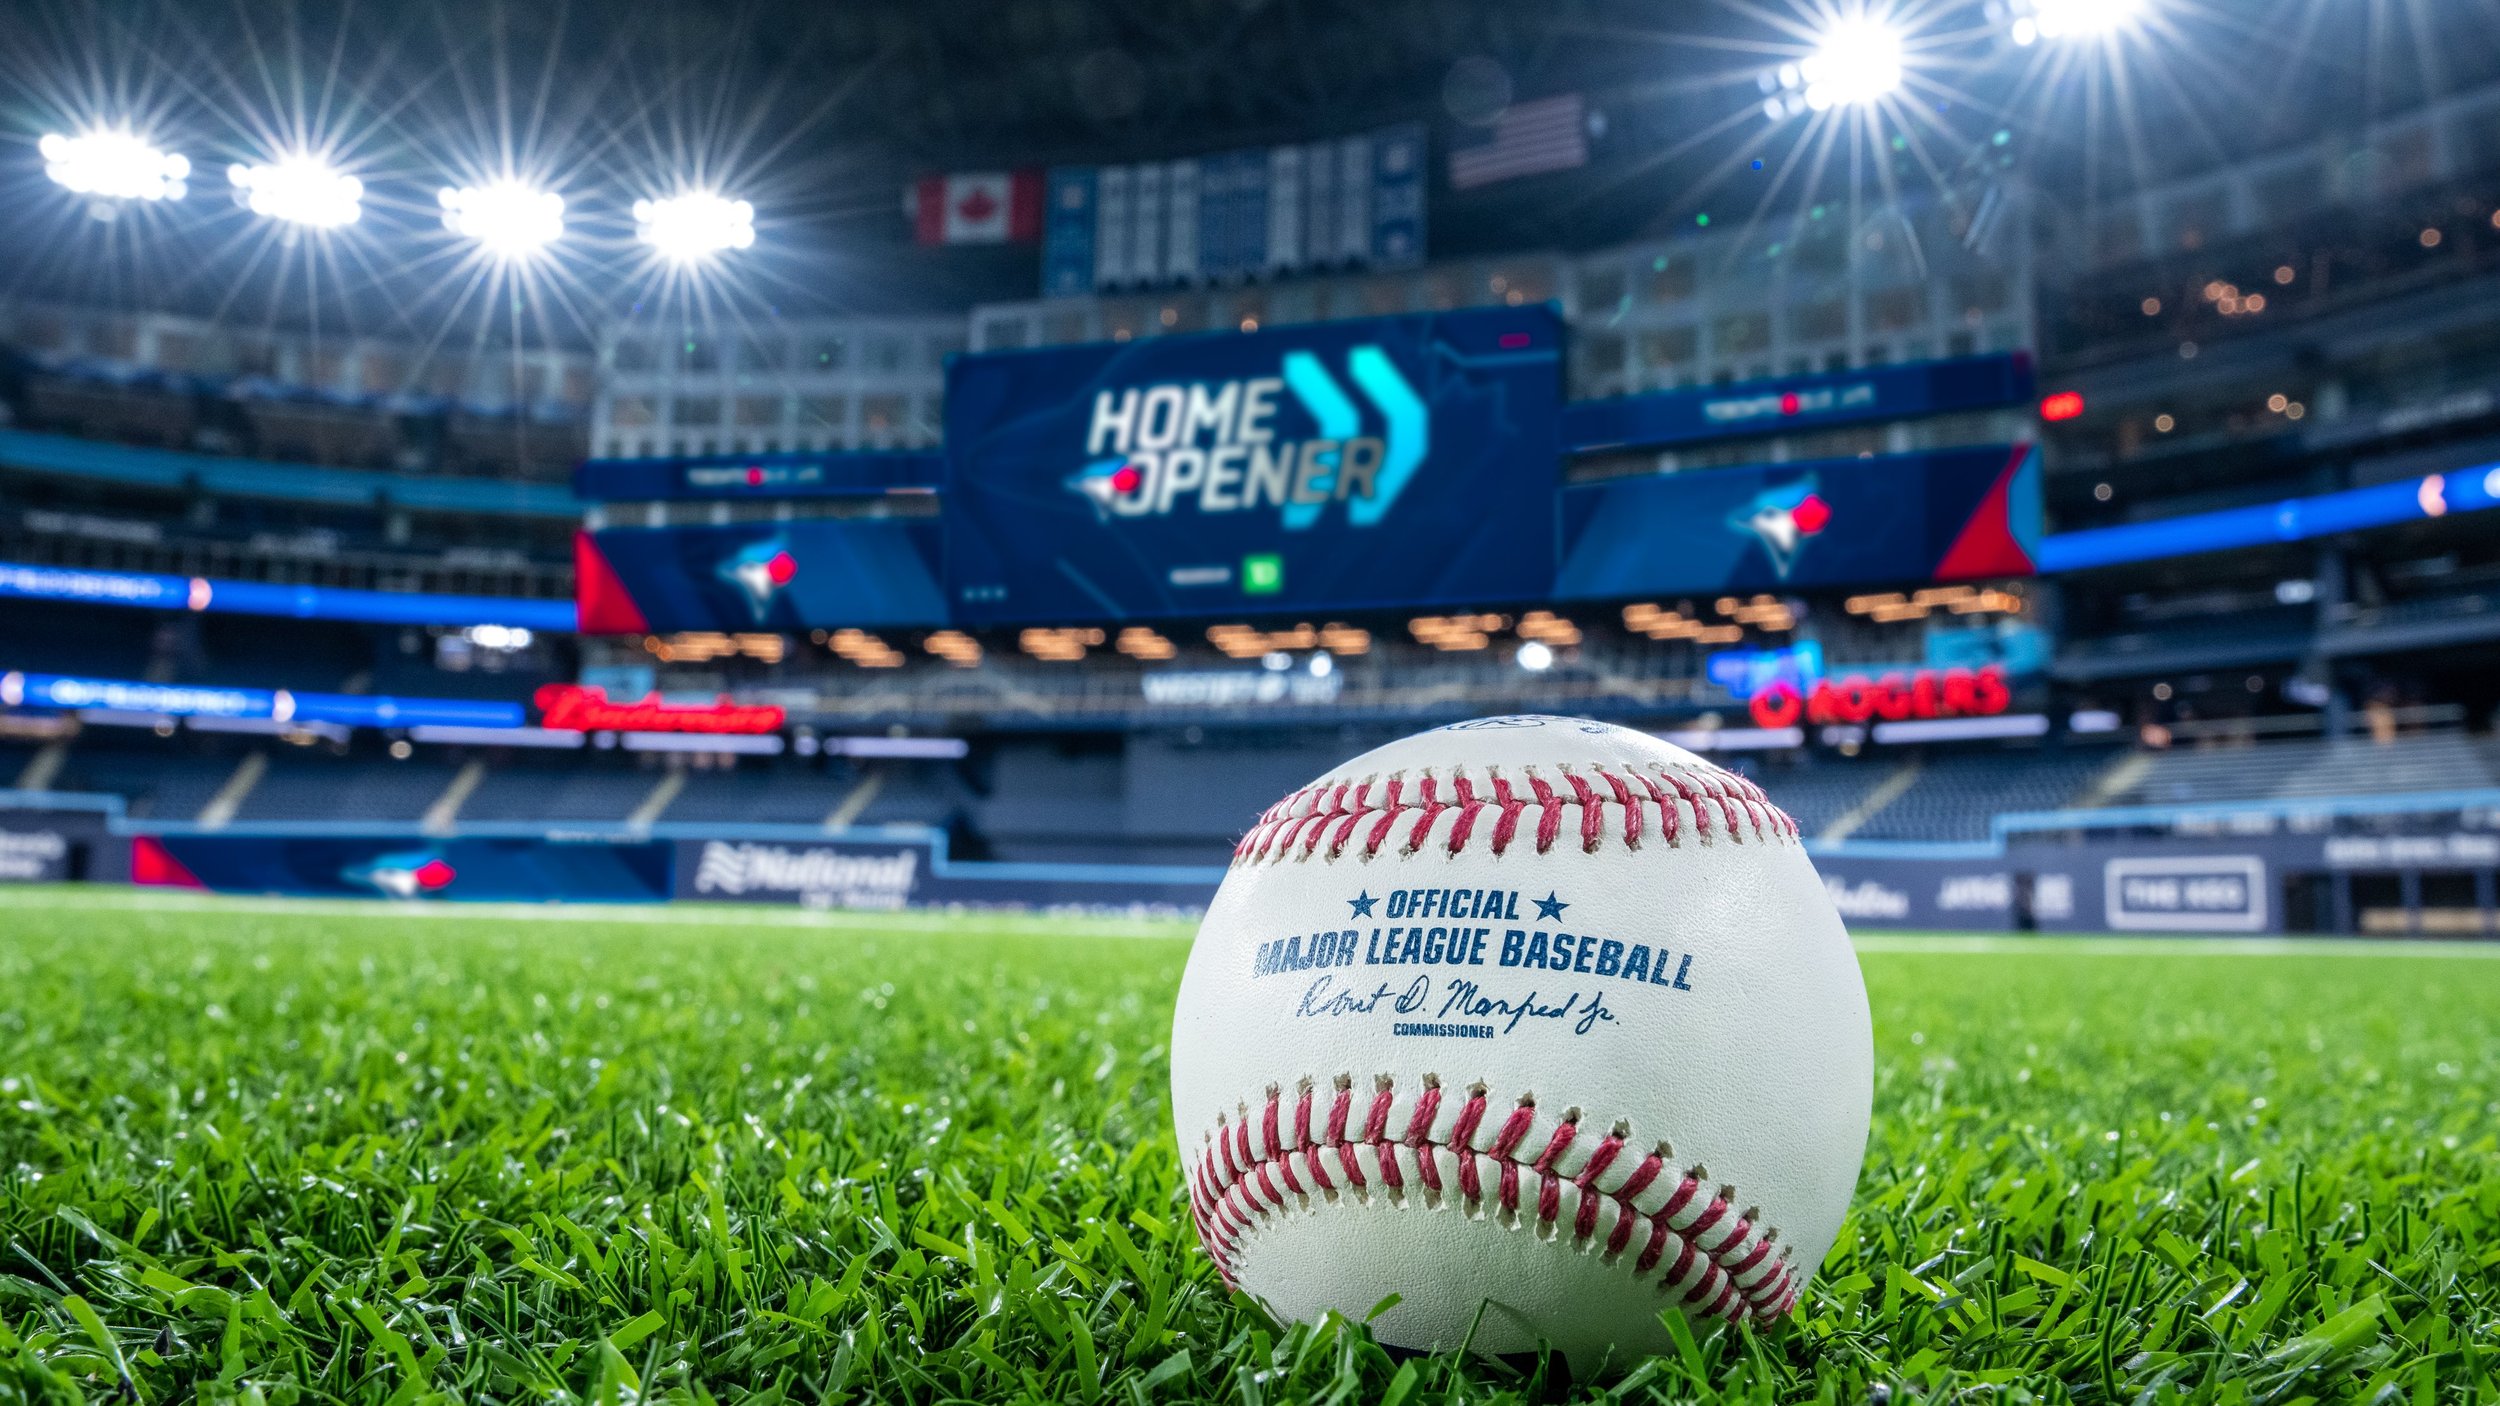 Blue Jays return to newlook Rogers Centre for home opener — Canadian